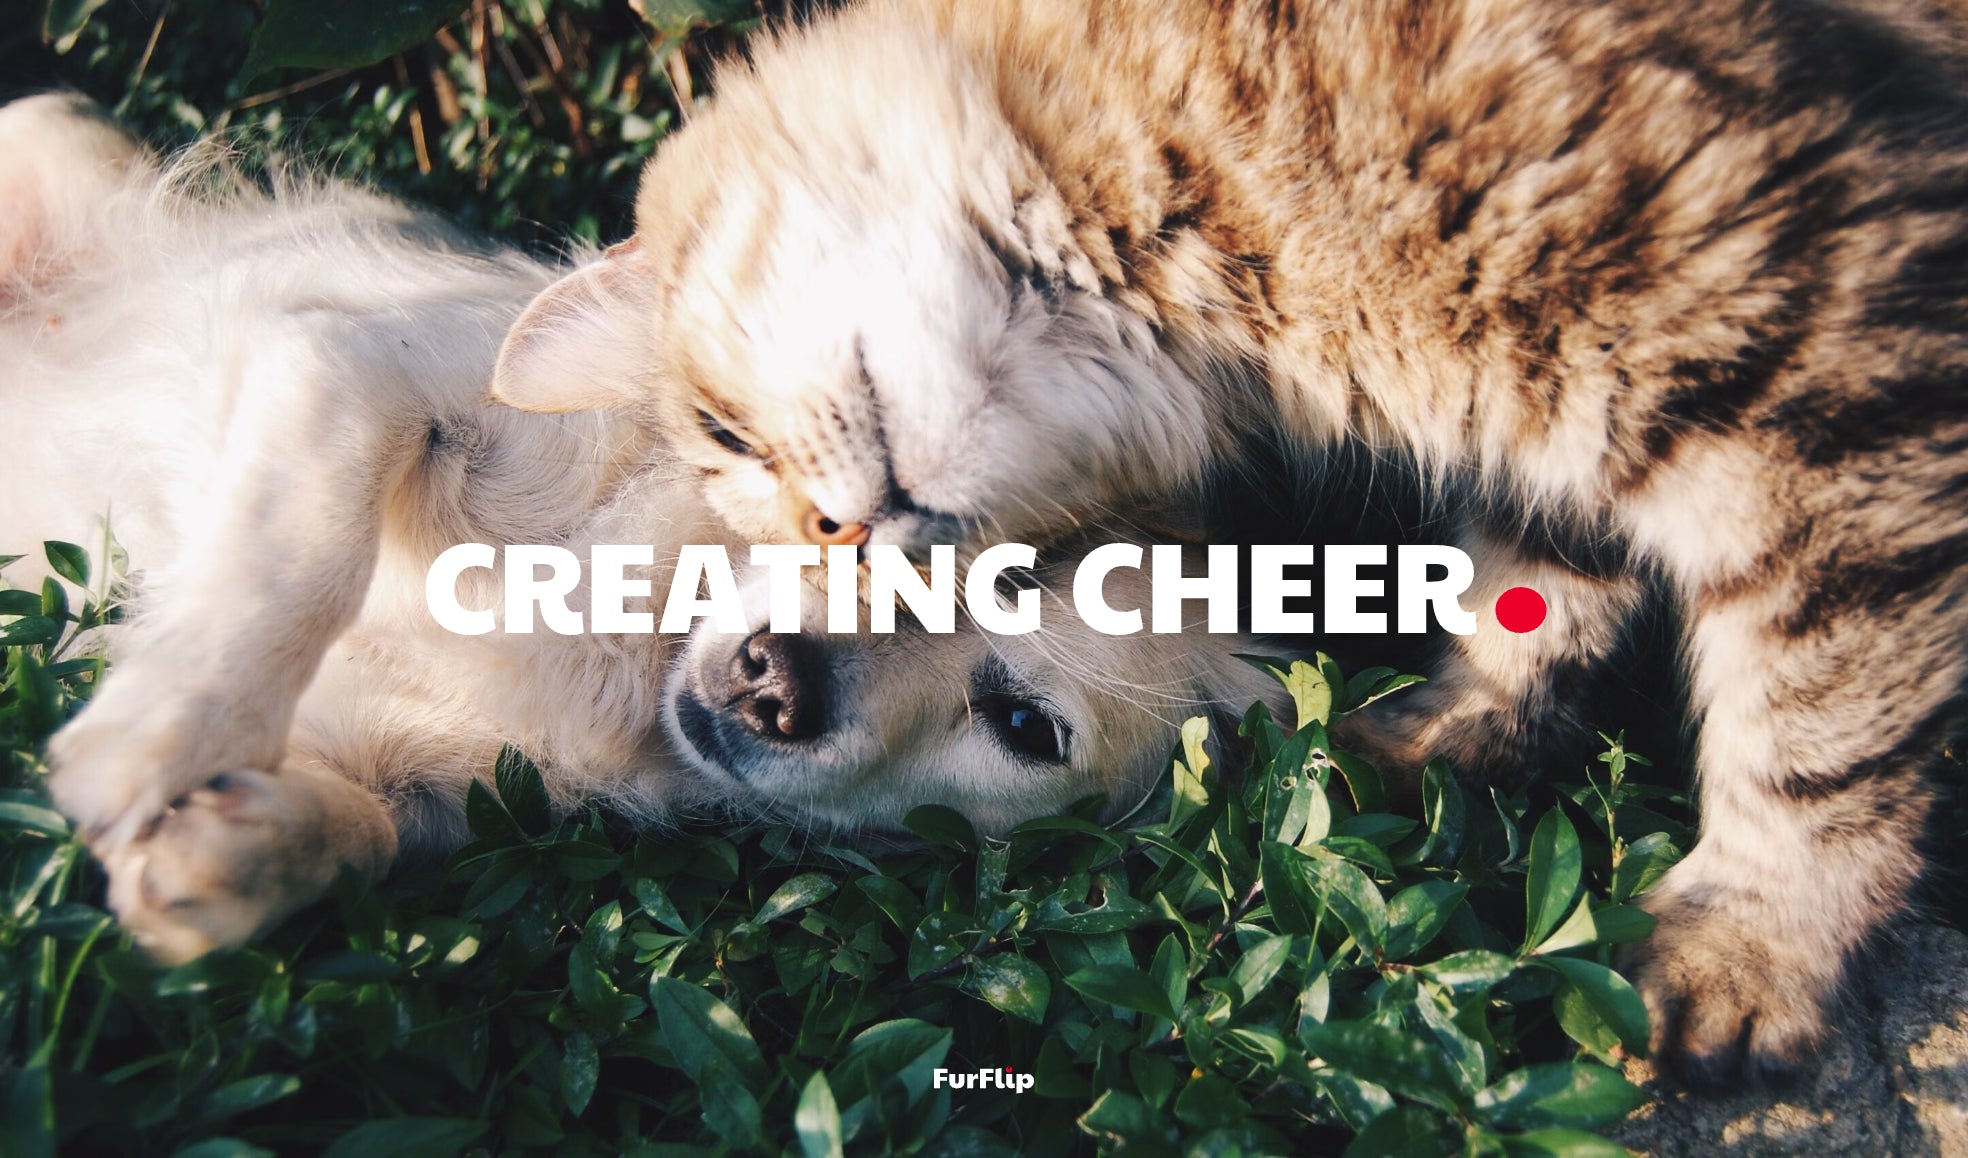 A cat and a dog lay on the ground, head to head, close together. The text above the image is FurFlip's slogan "CREATING CHEER."